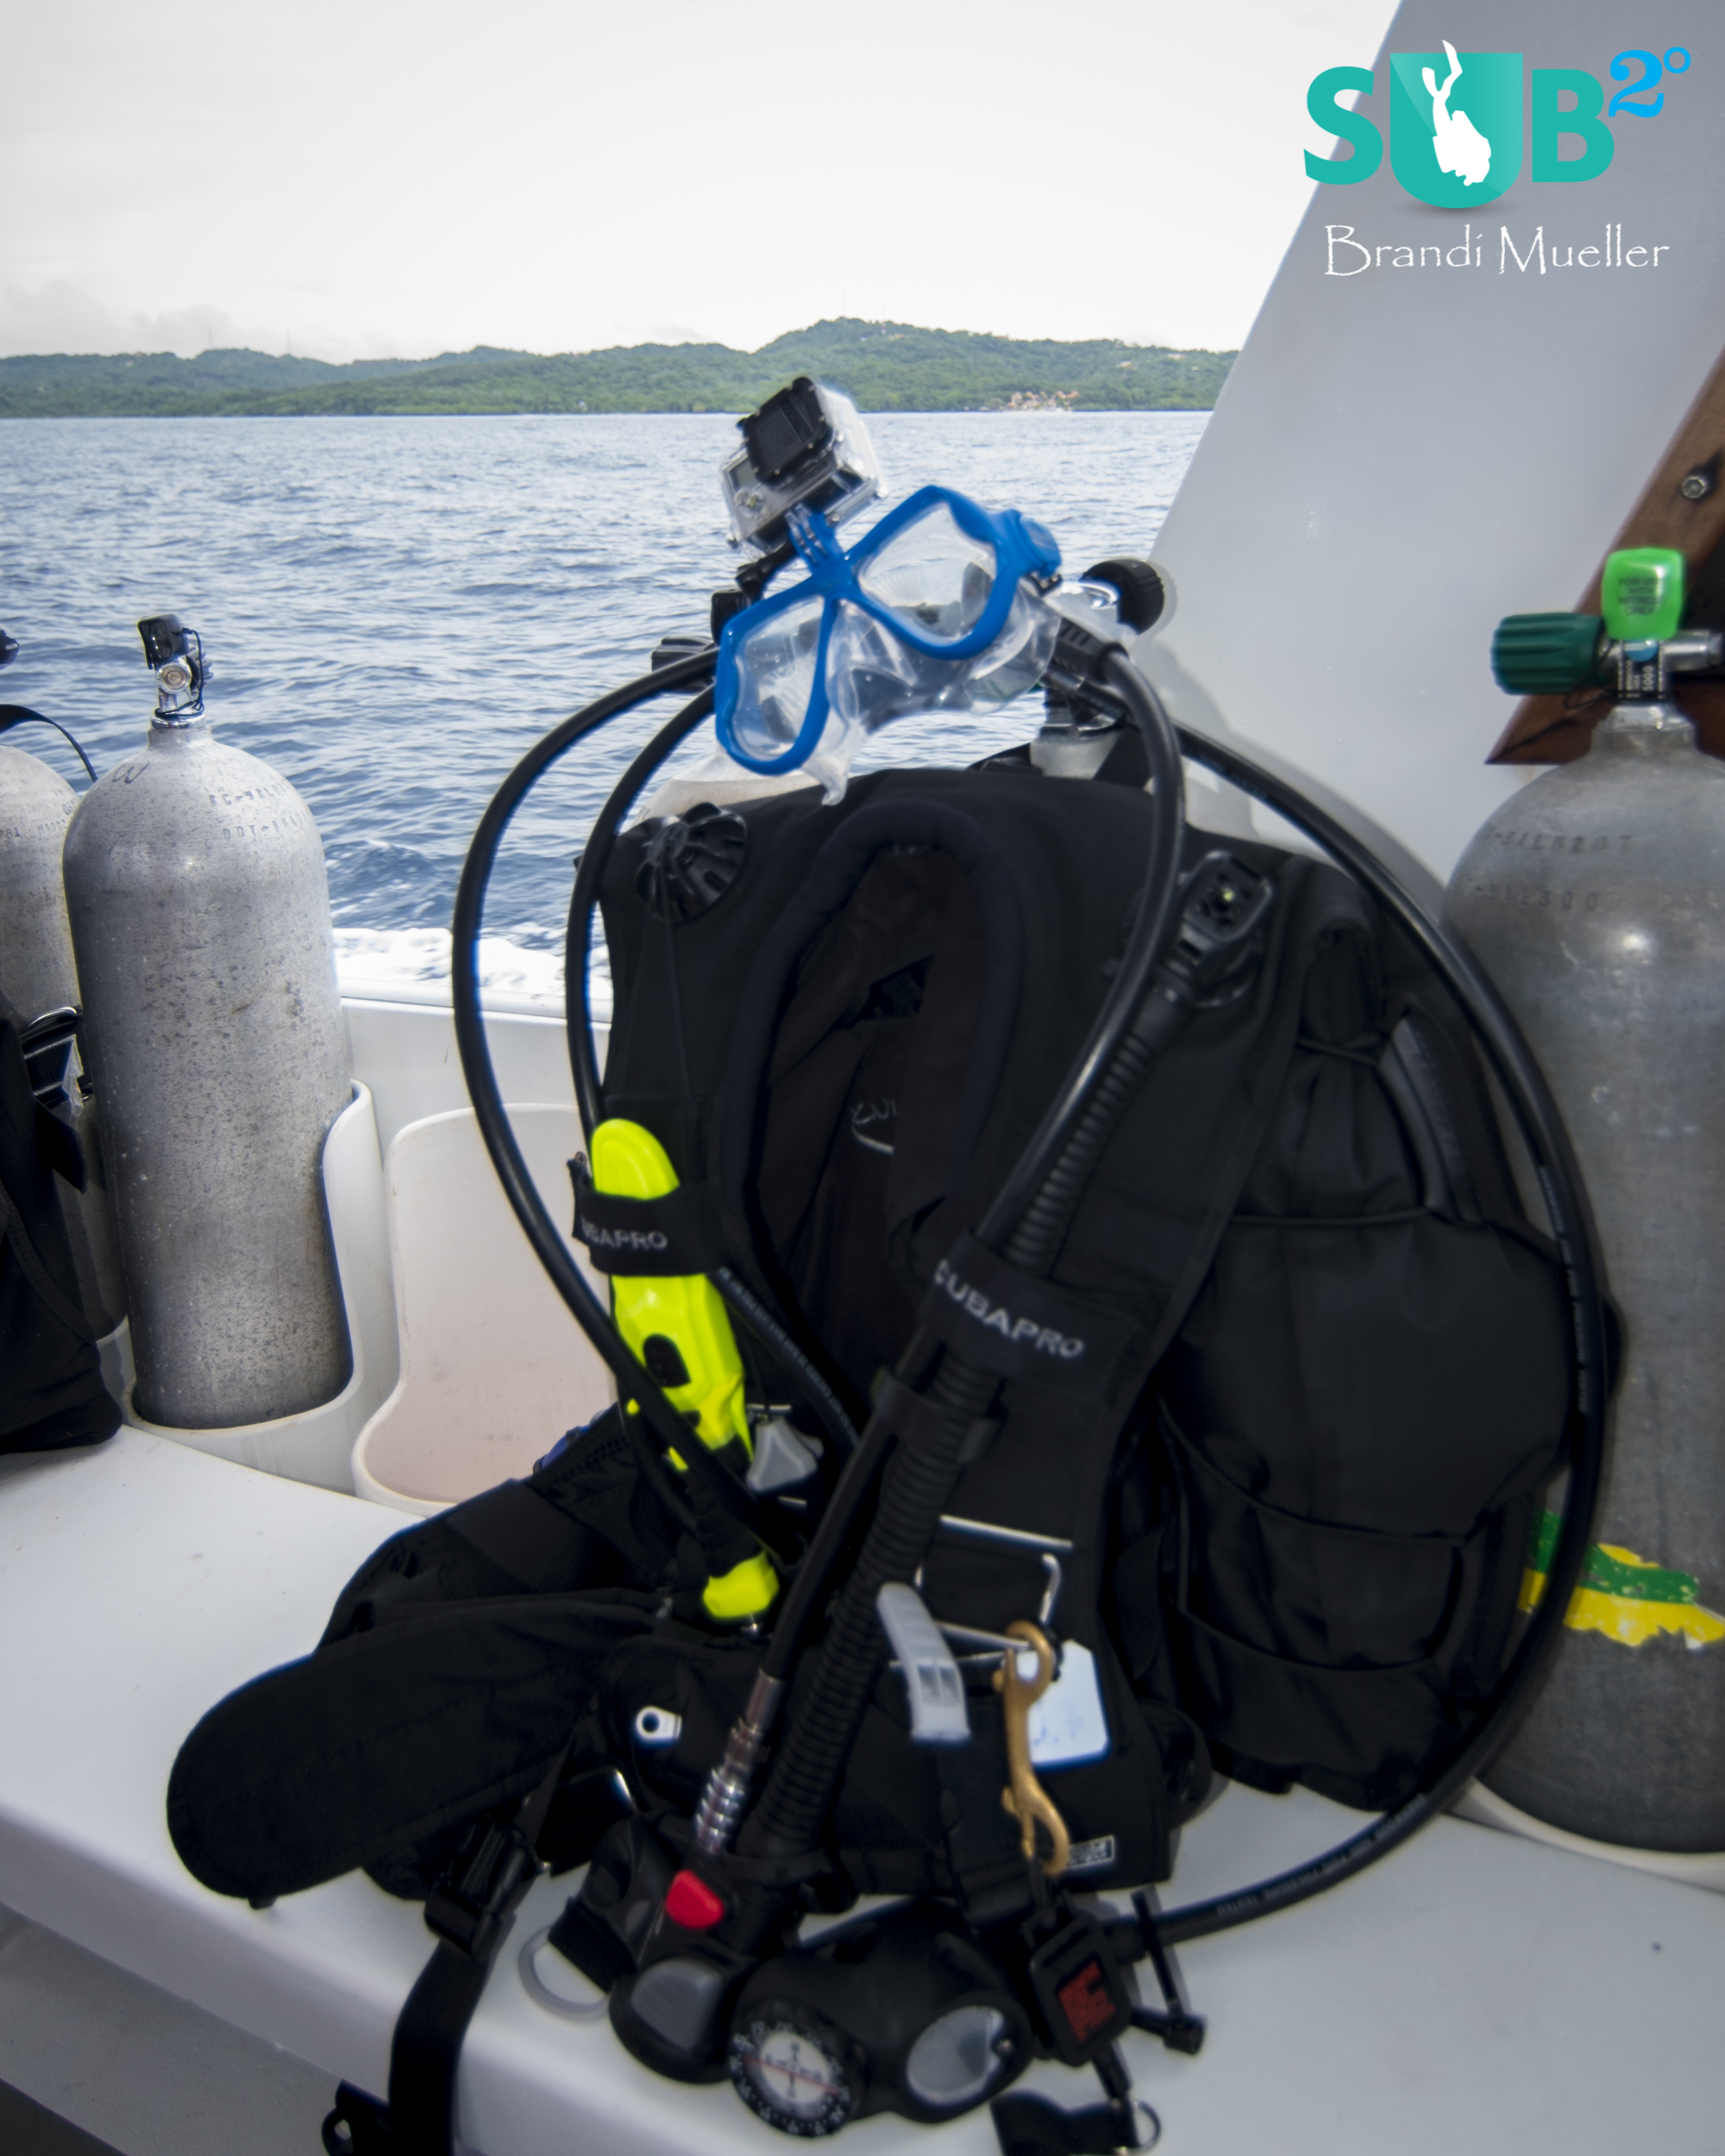 The perfect compliment to any scuba diver's gear kit: Sandmarc's Aqua Mask built to mount a GoPro.